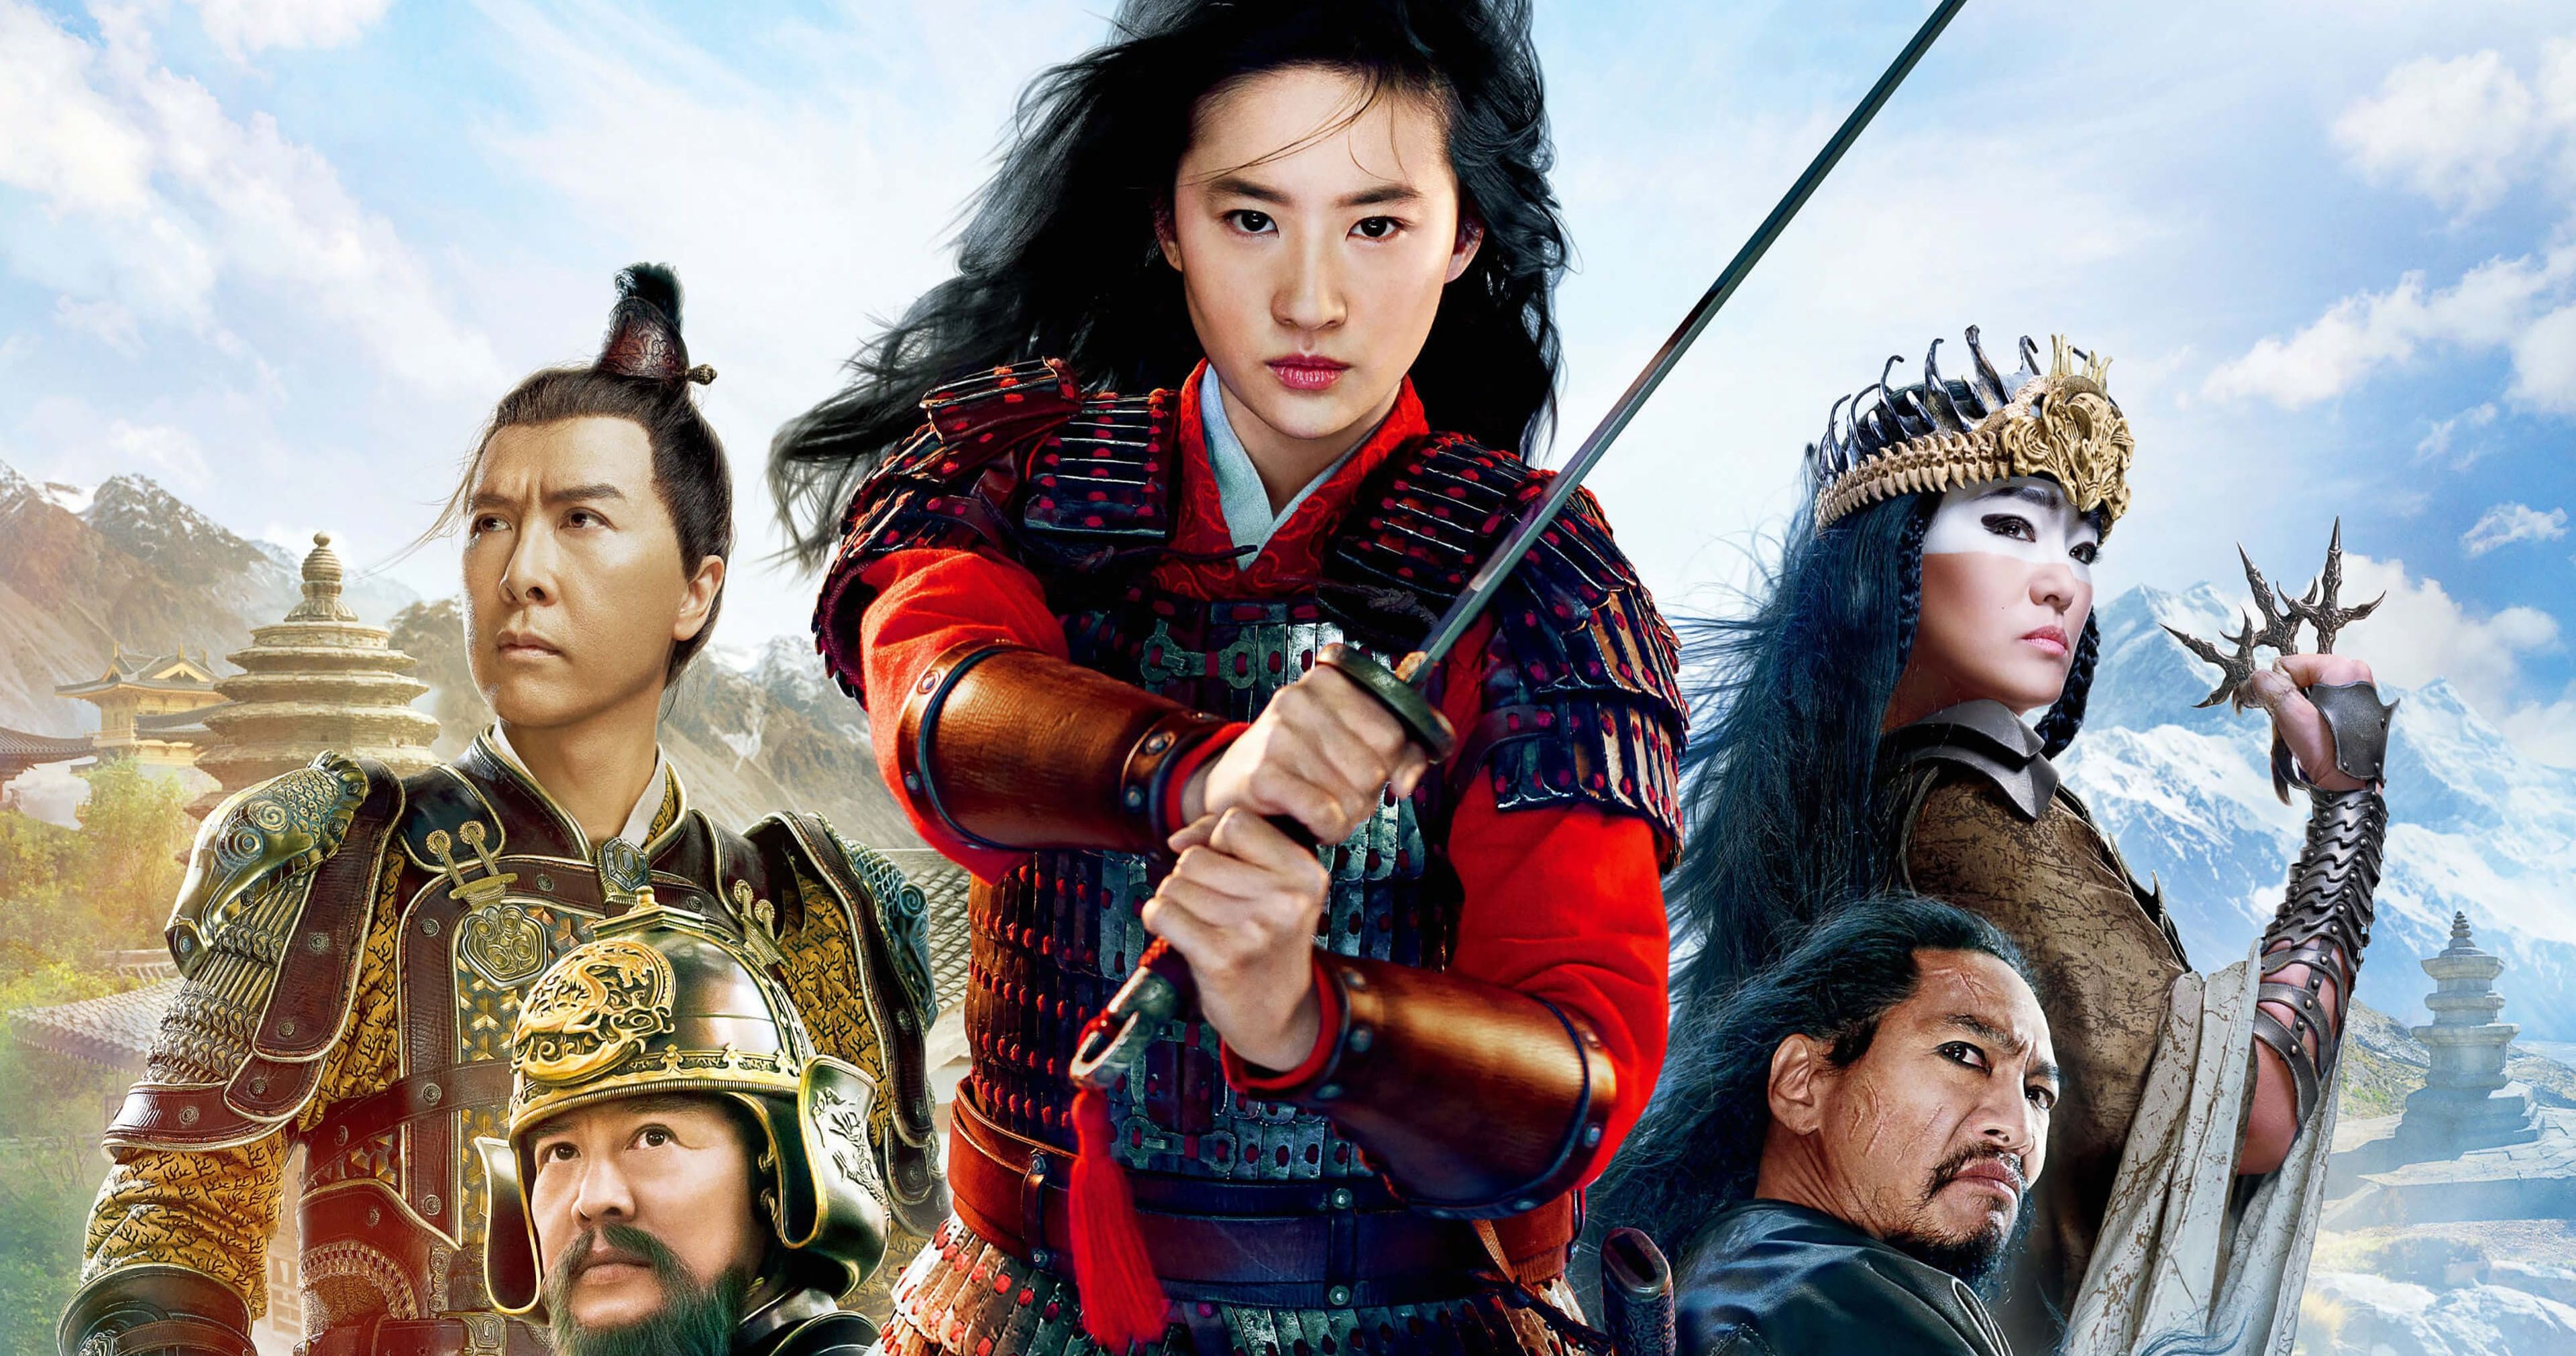 Mulan Can Now Be Streamed for Free on Disney+